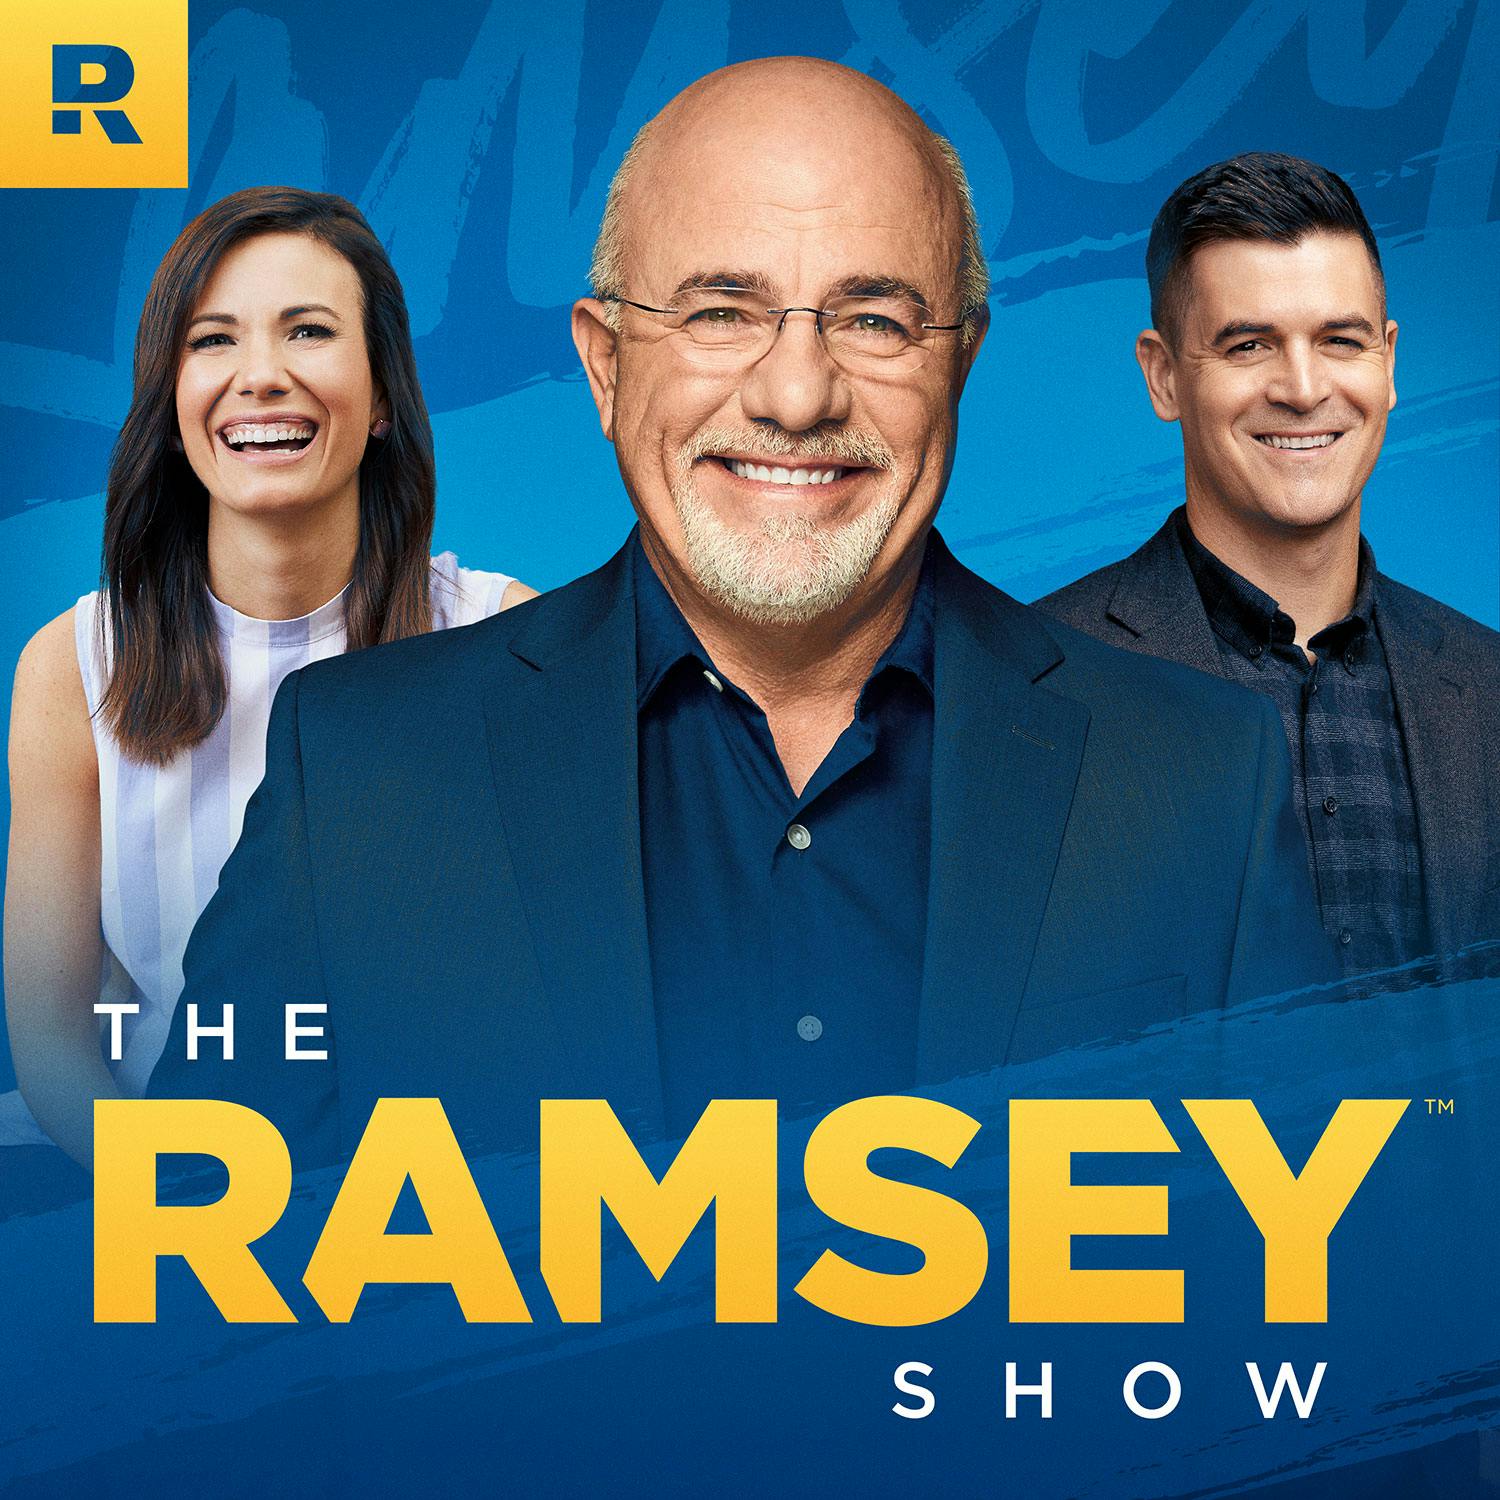 The Ramsey Show by Ramsey Network